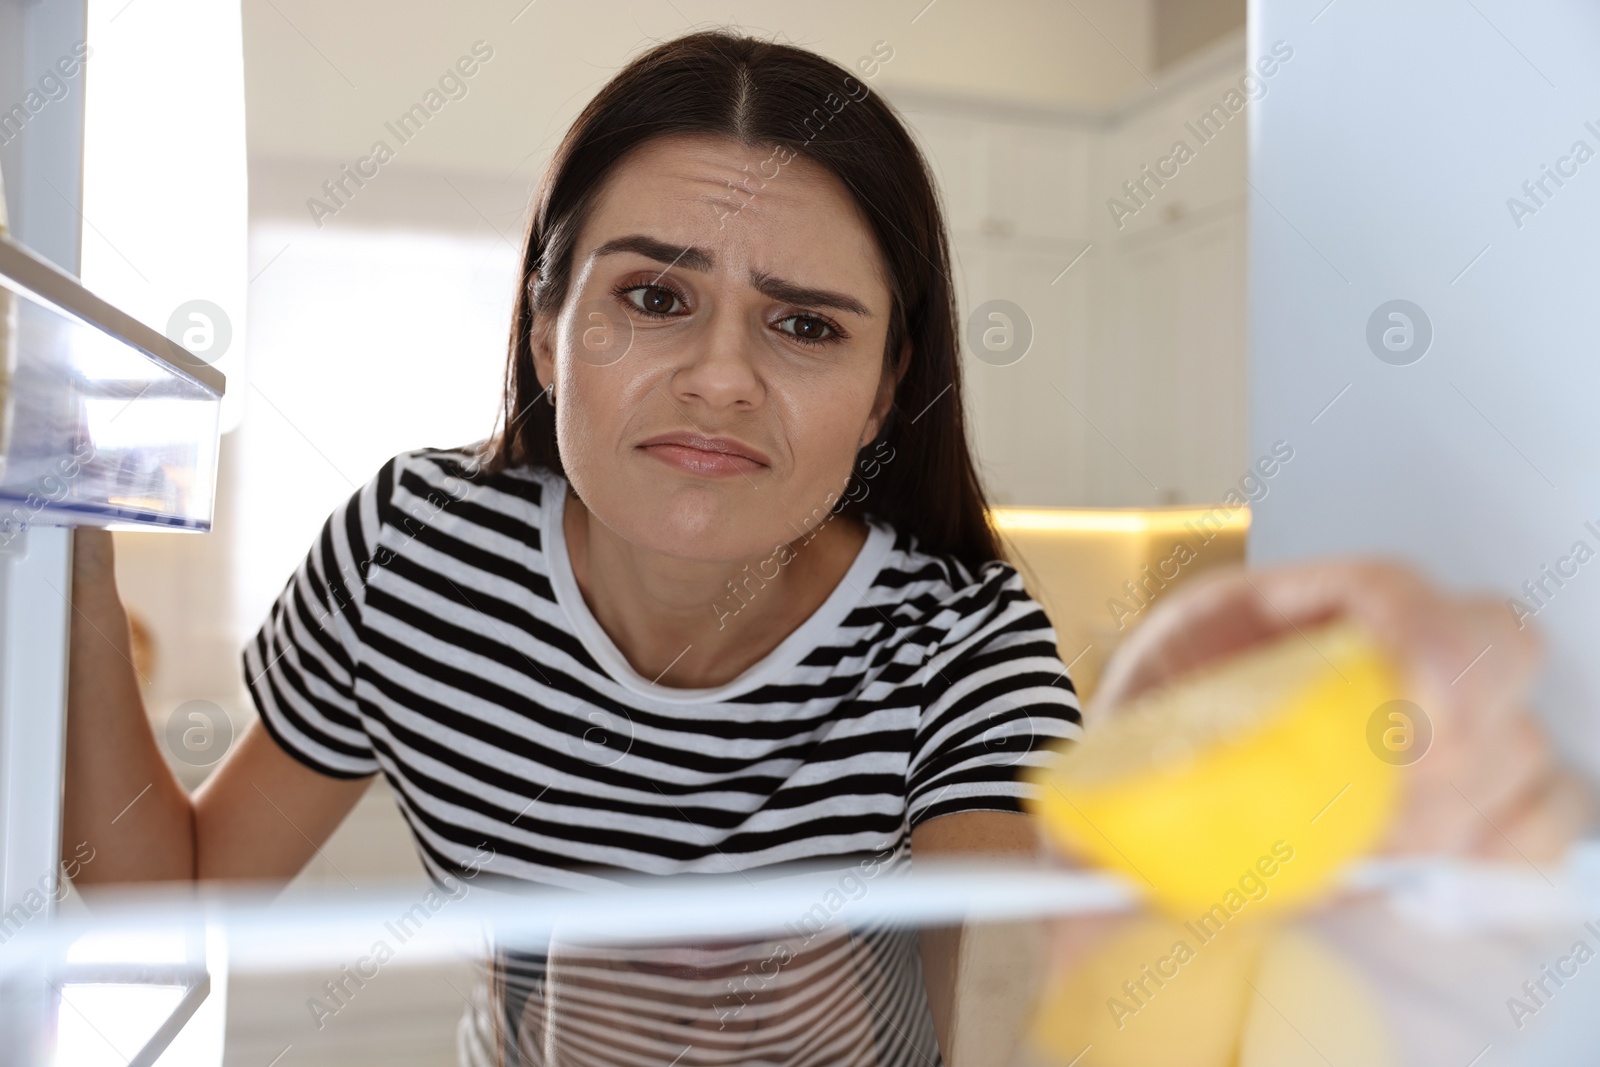 Photo of Upset woman near empty refrigerator in kitchen, view from inside